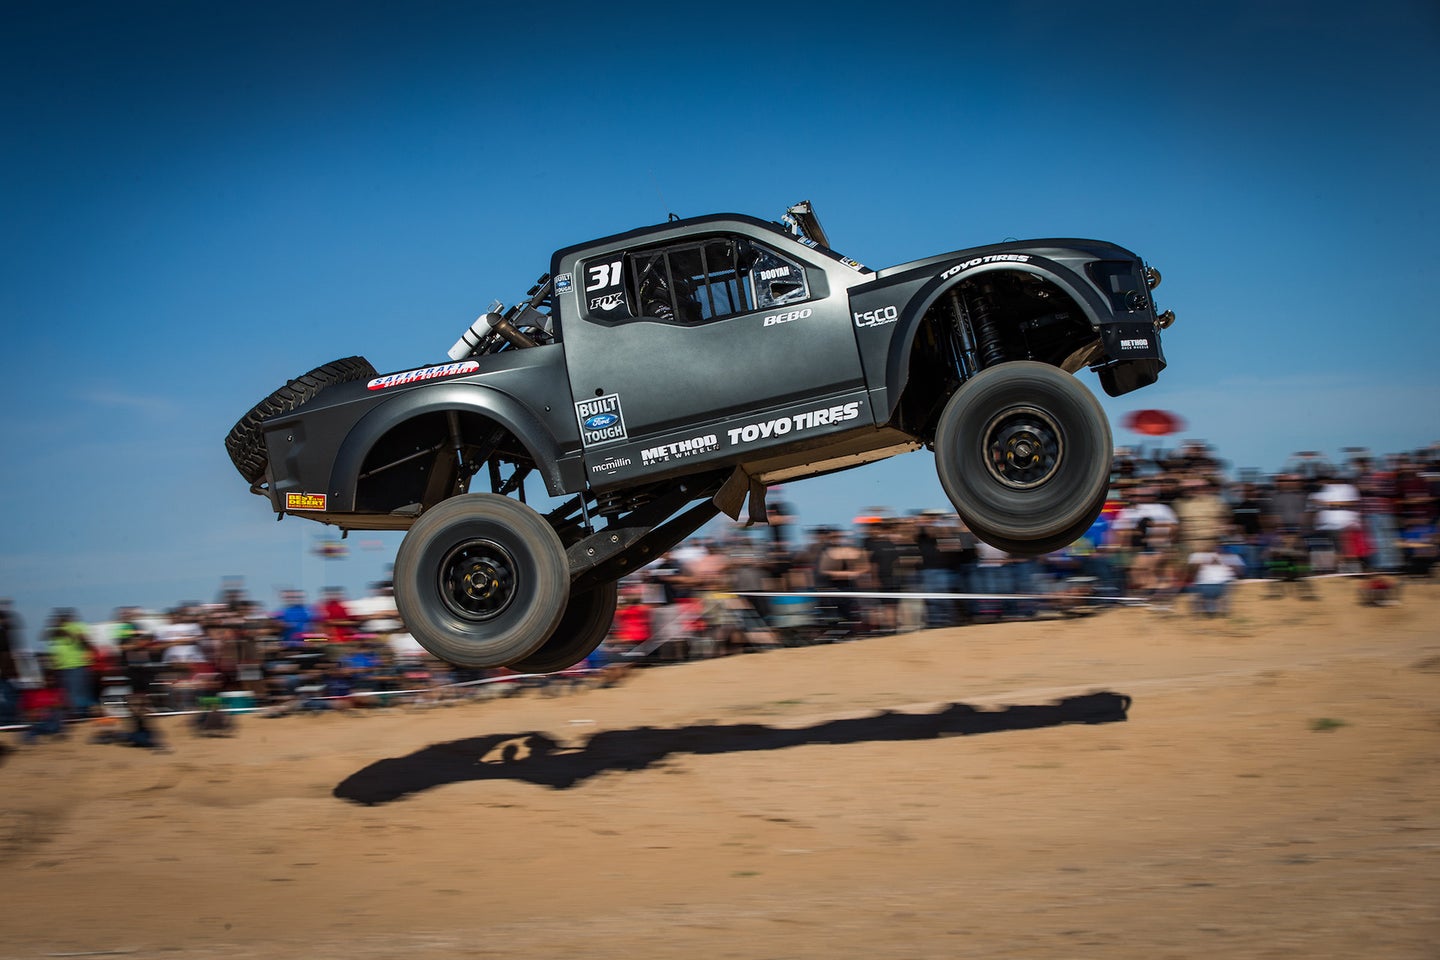 Andy McMillin and Toyo Tires Win In Arizona